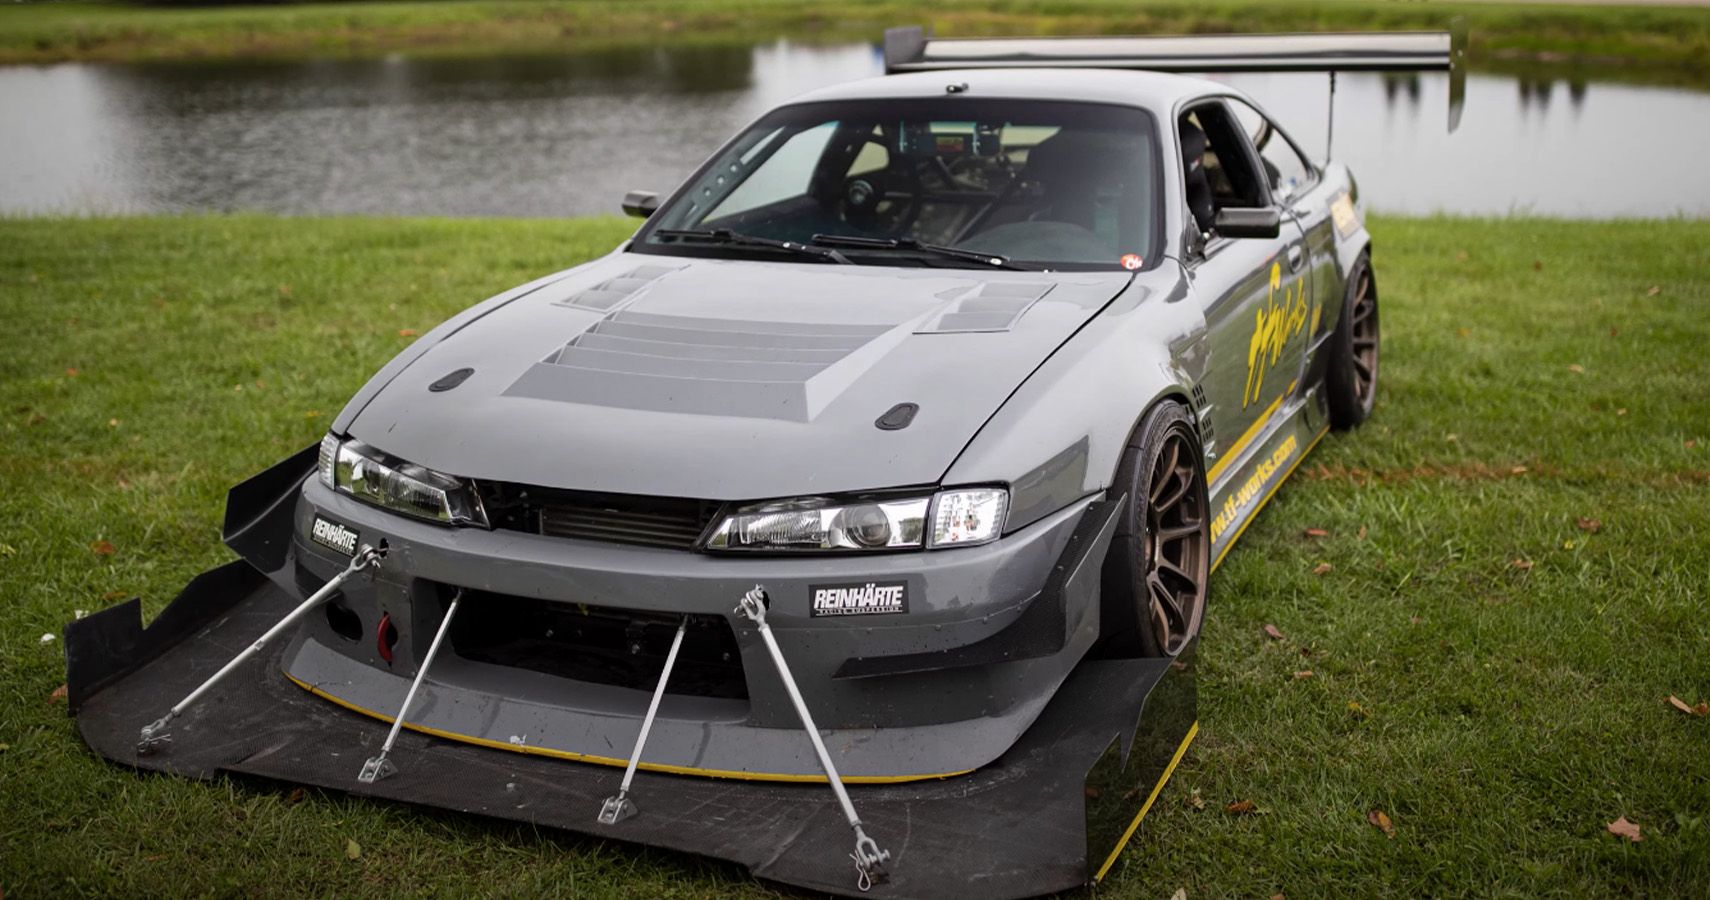 Few 240sx Projects Could Ever Hope To Be As Radical As This Honda Swapped Nissan 240sx